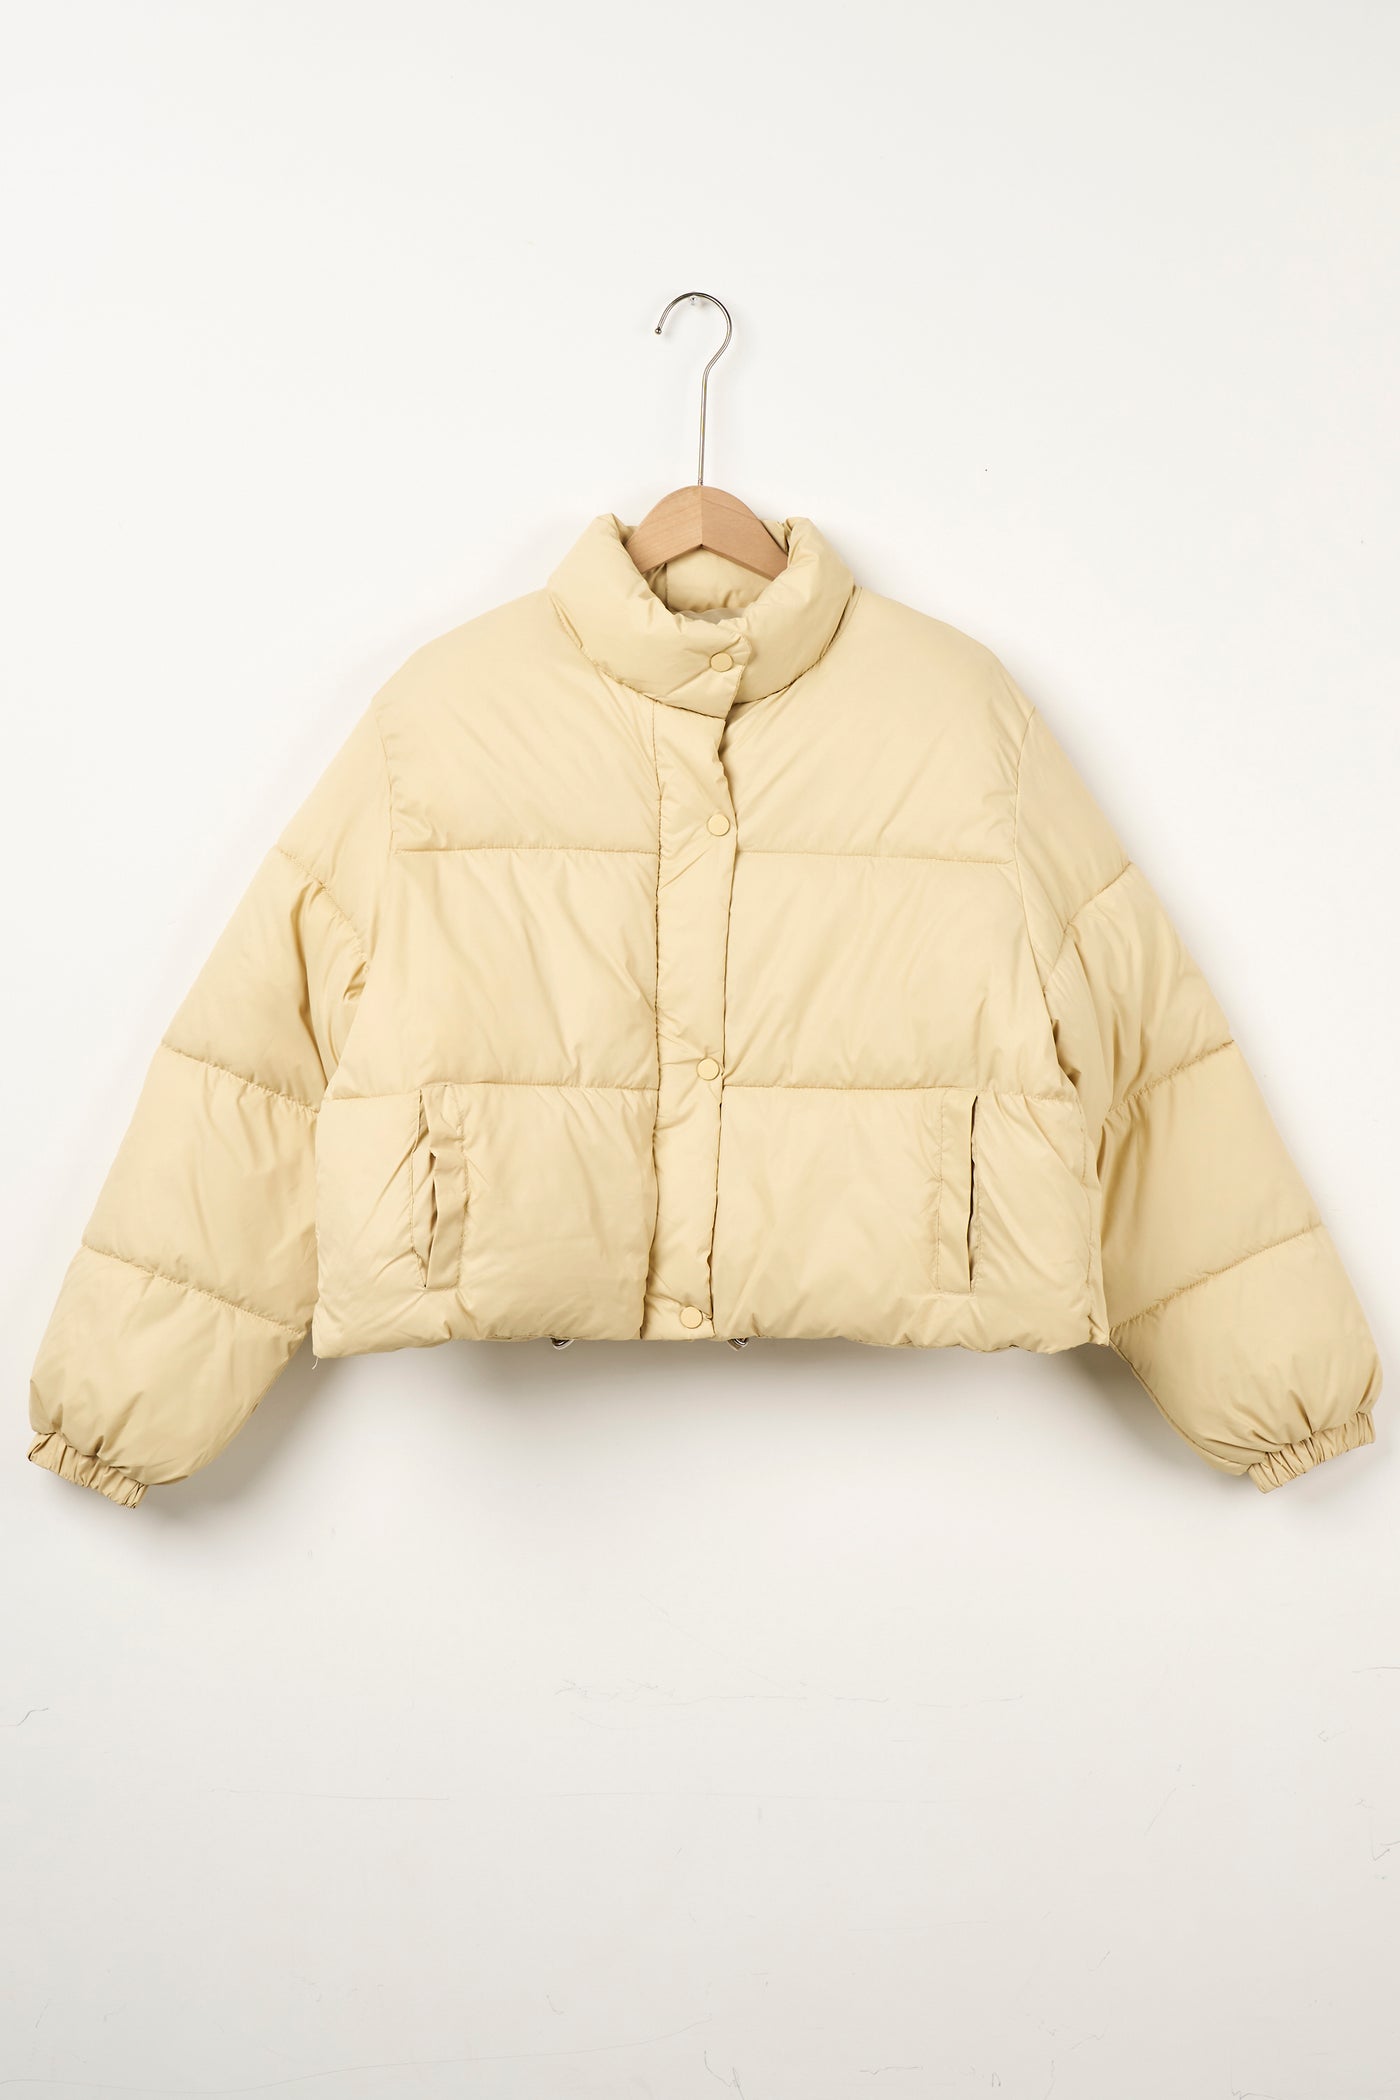 storets.com Aria Cropped Puffer Jacket